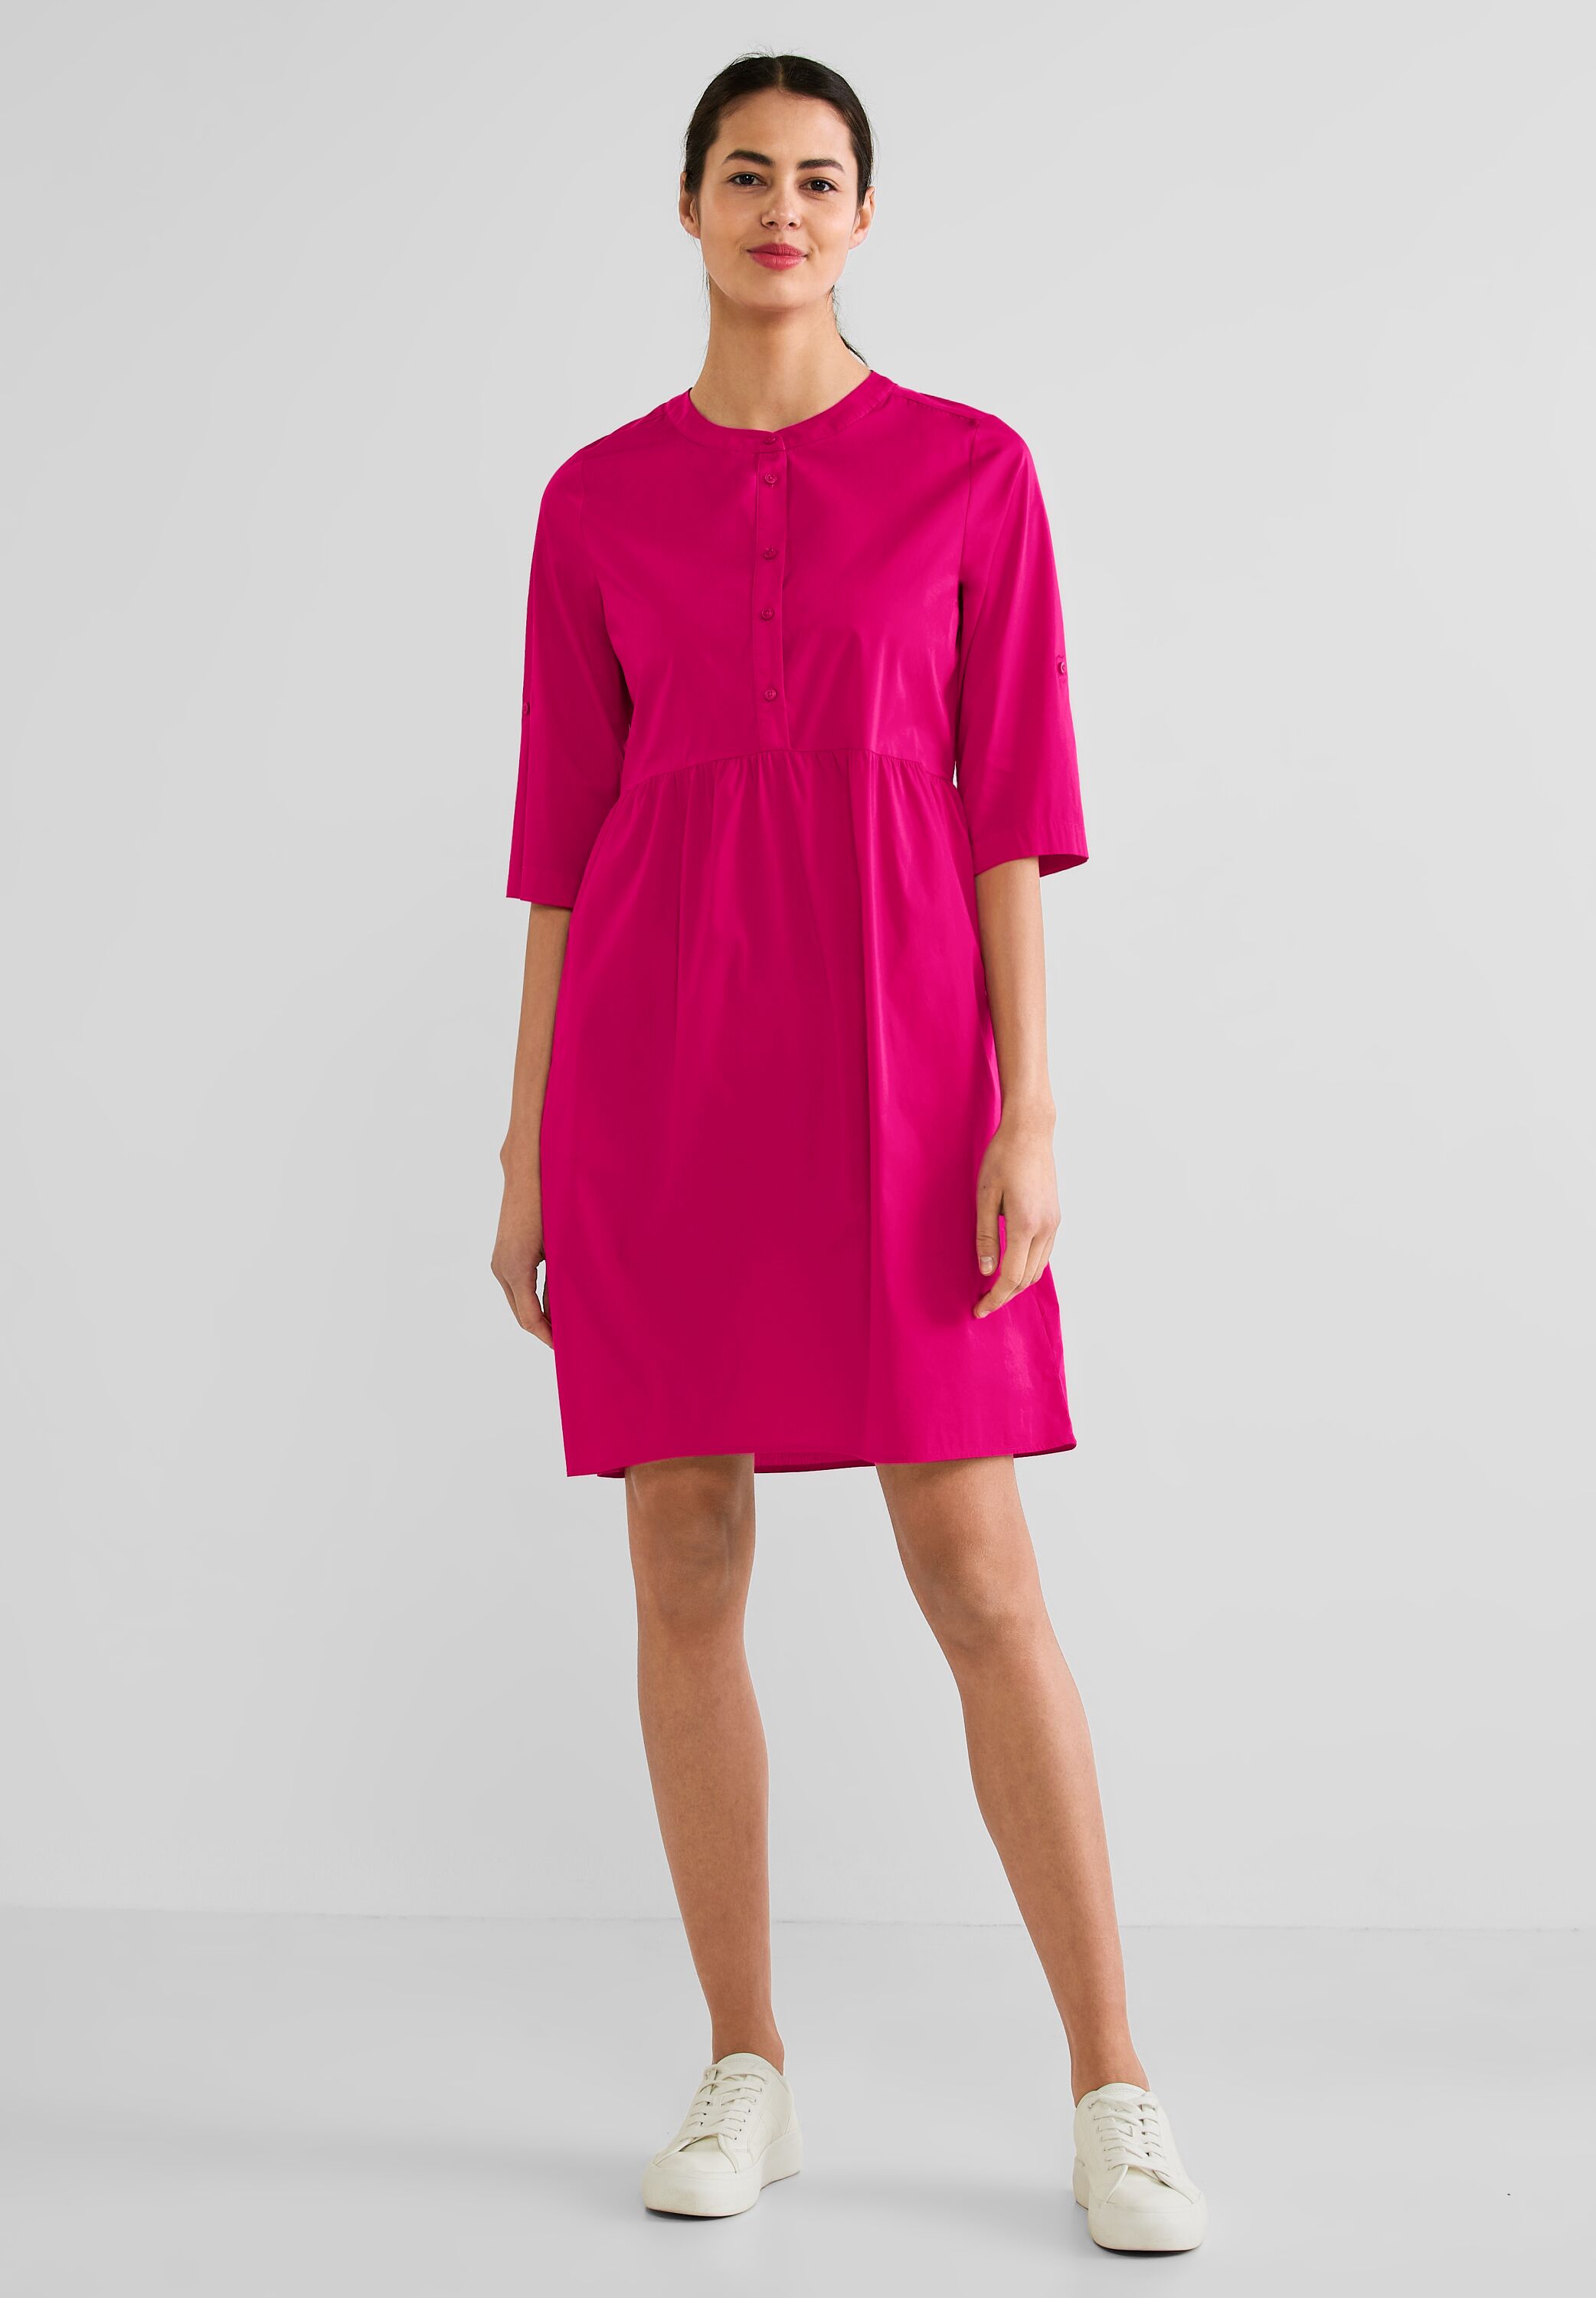 One CONCEPT Street - A143522-14717 Mode Nu in Kleid Pink